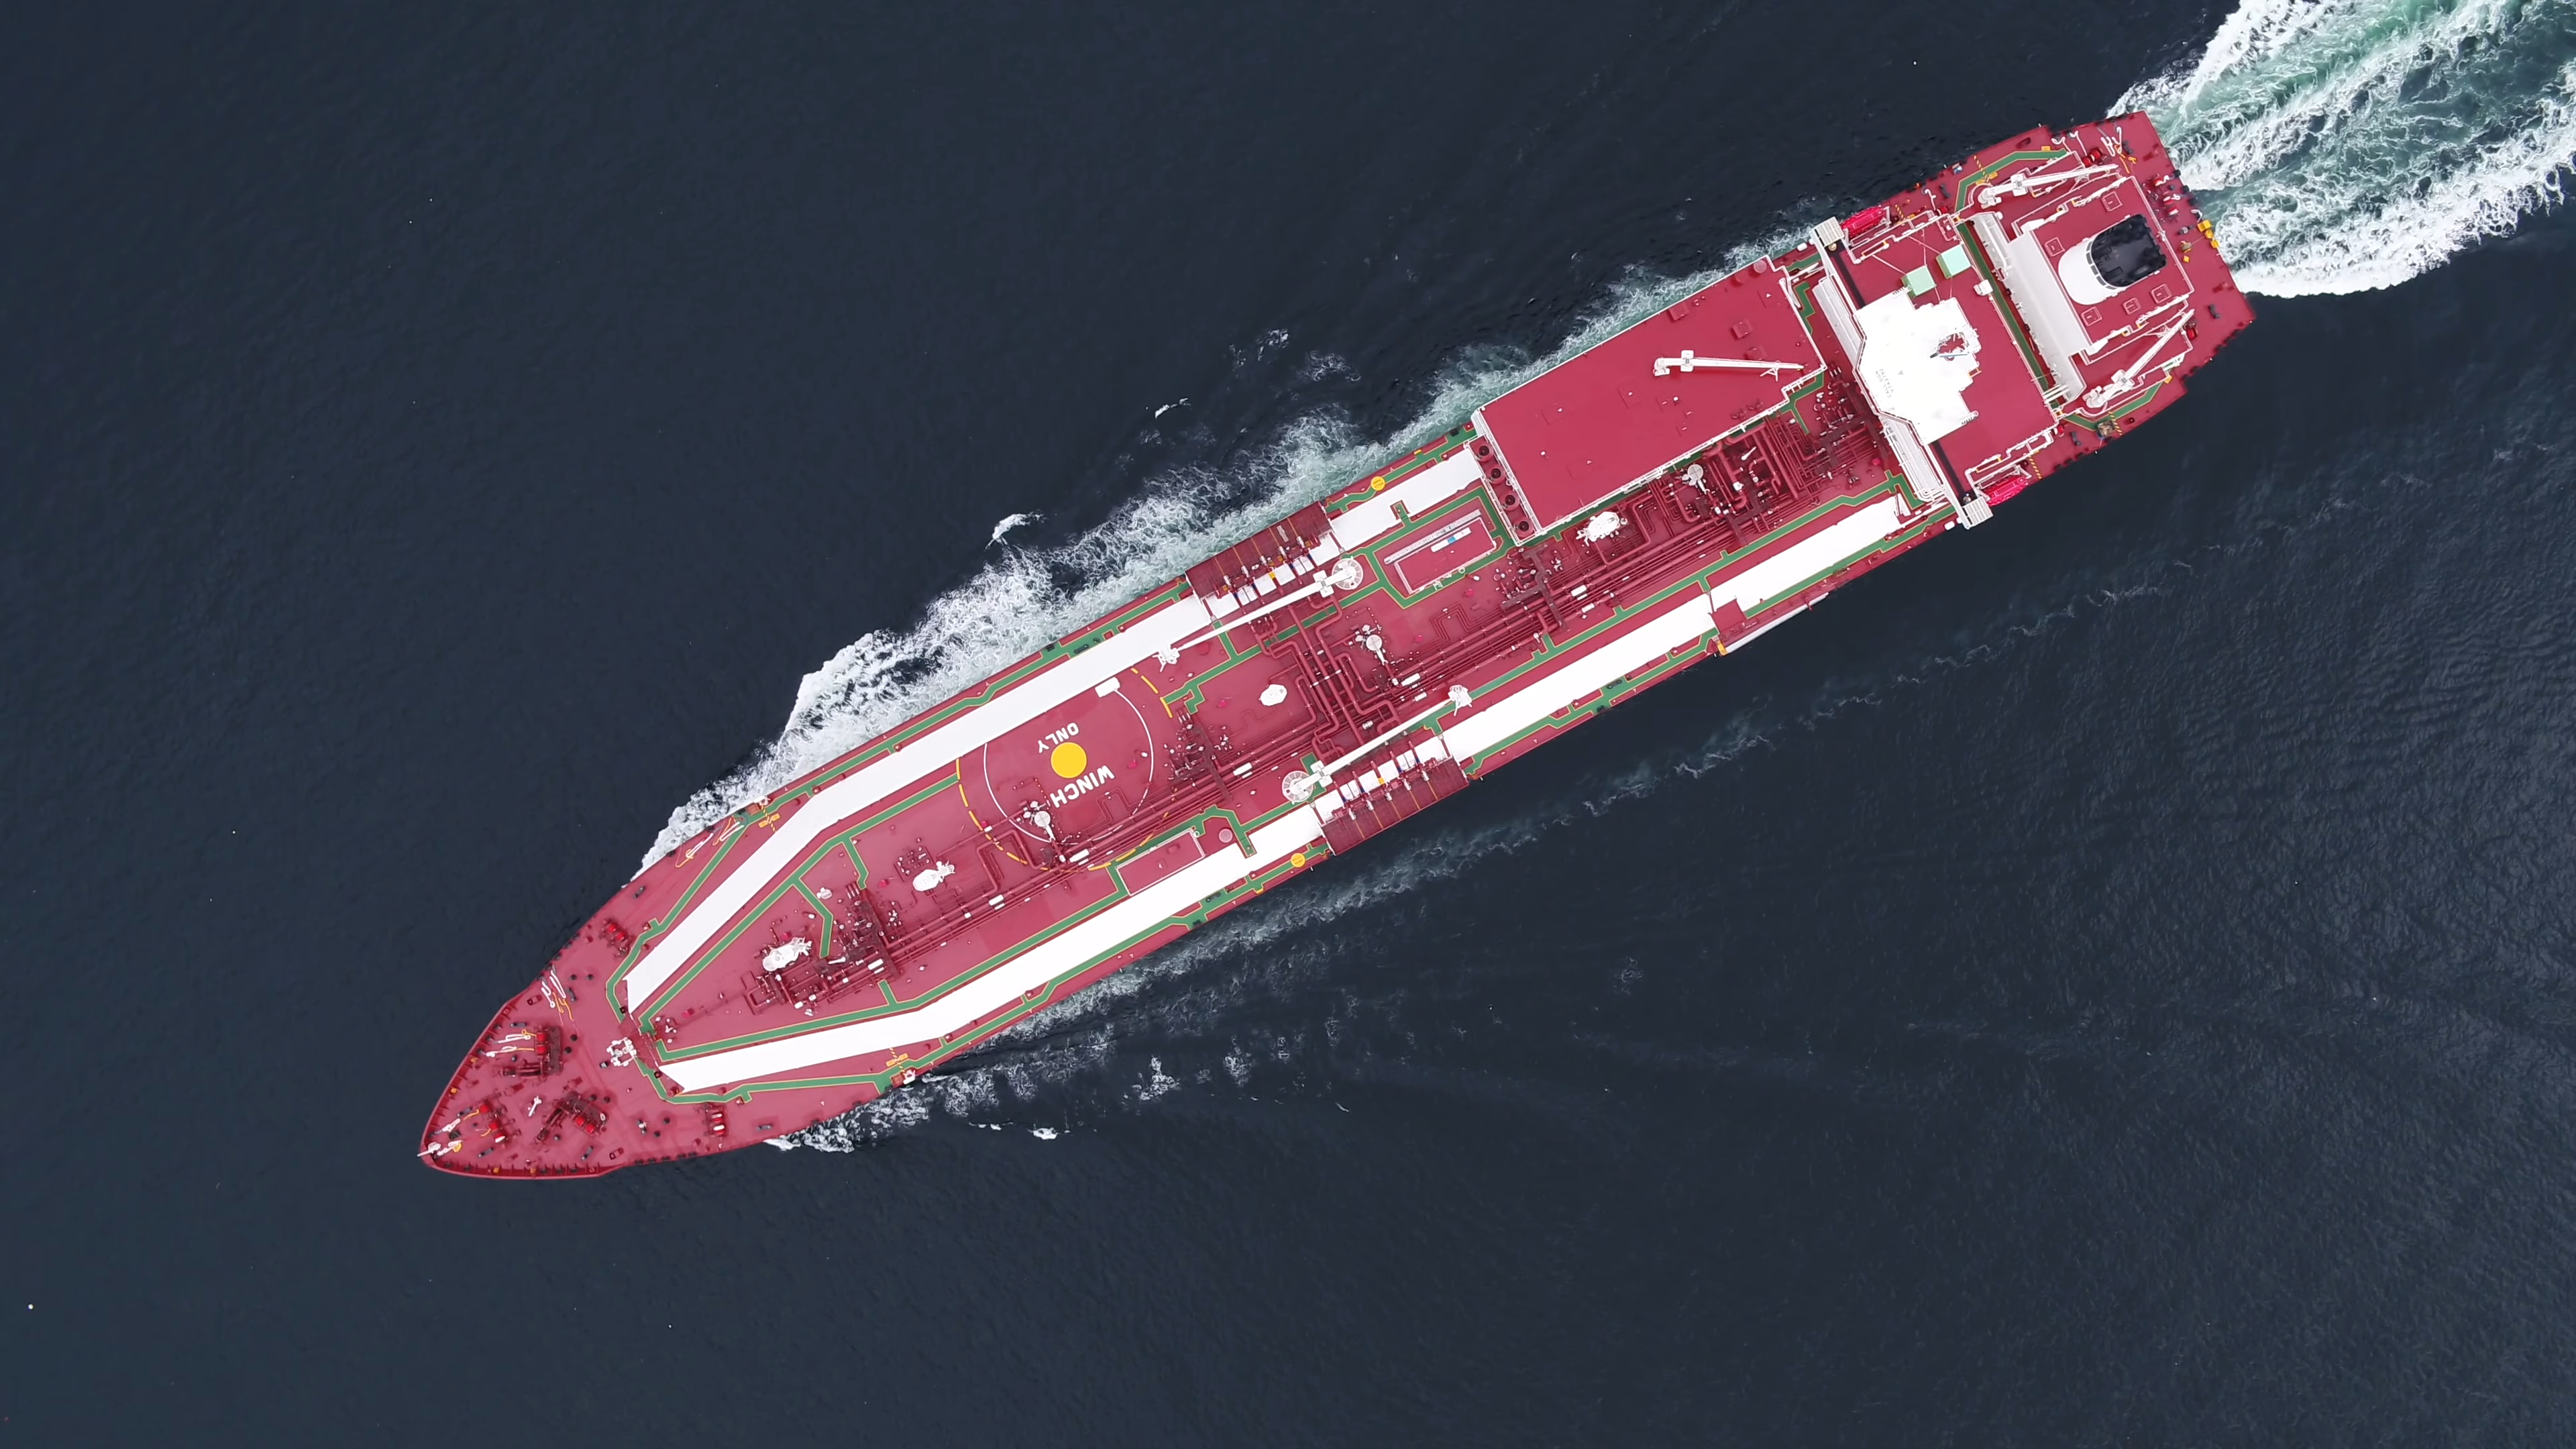 Flex LNG to welcome 10th vessel